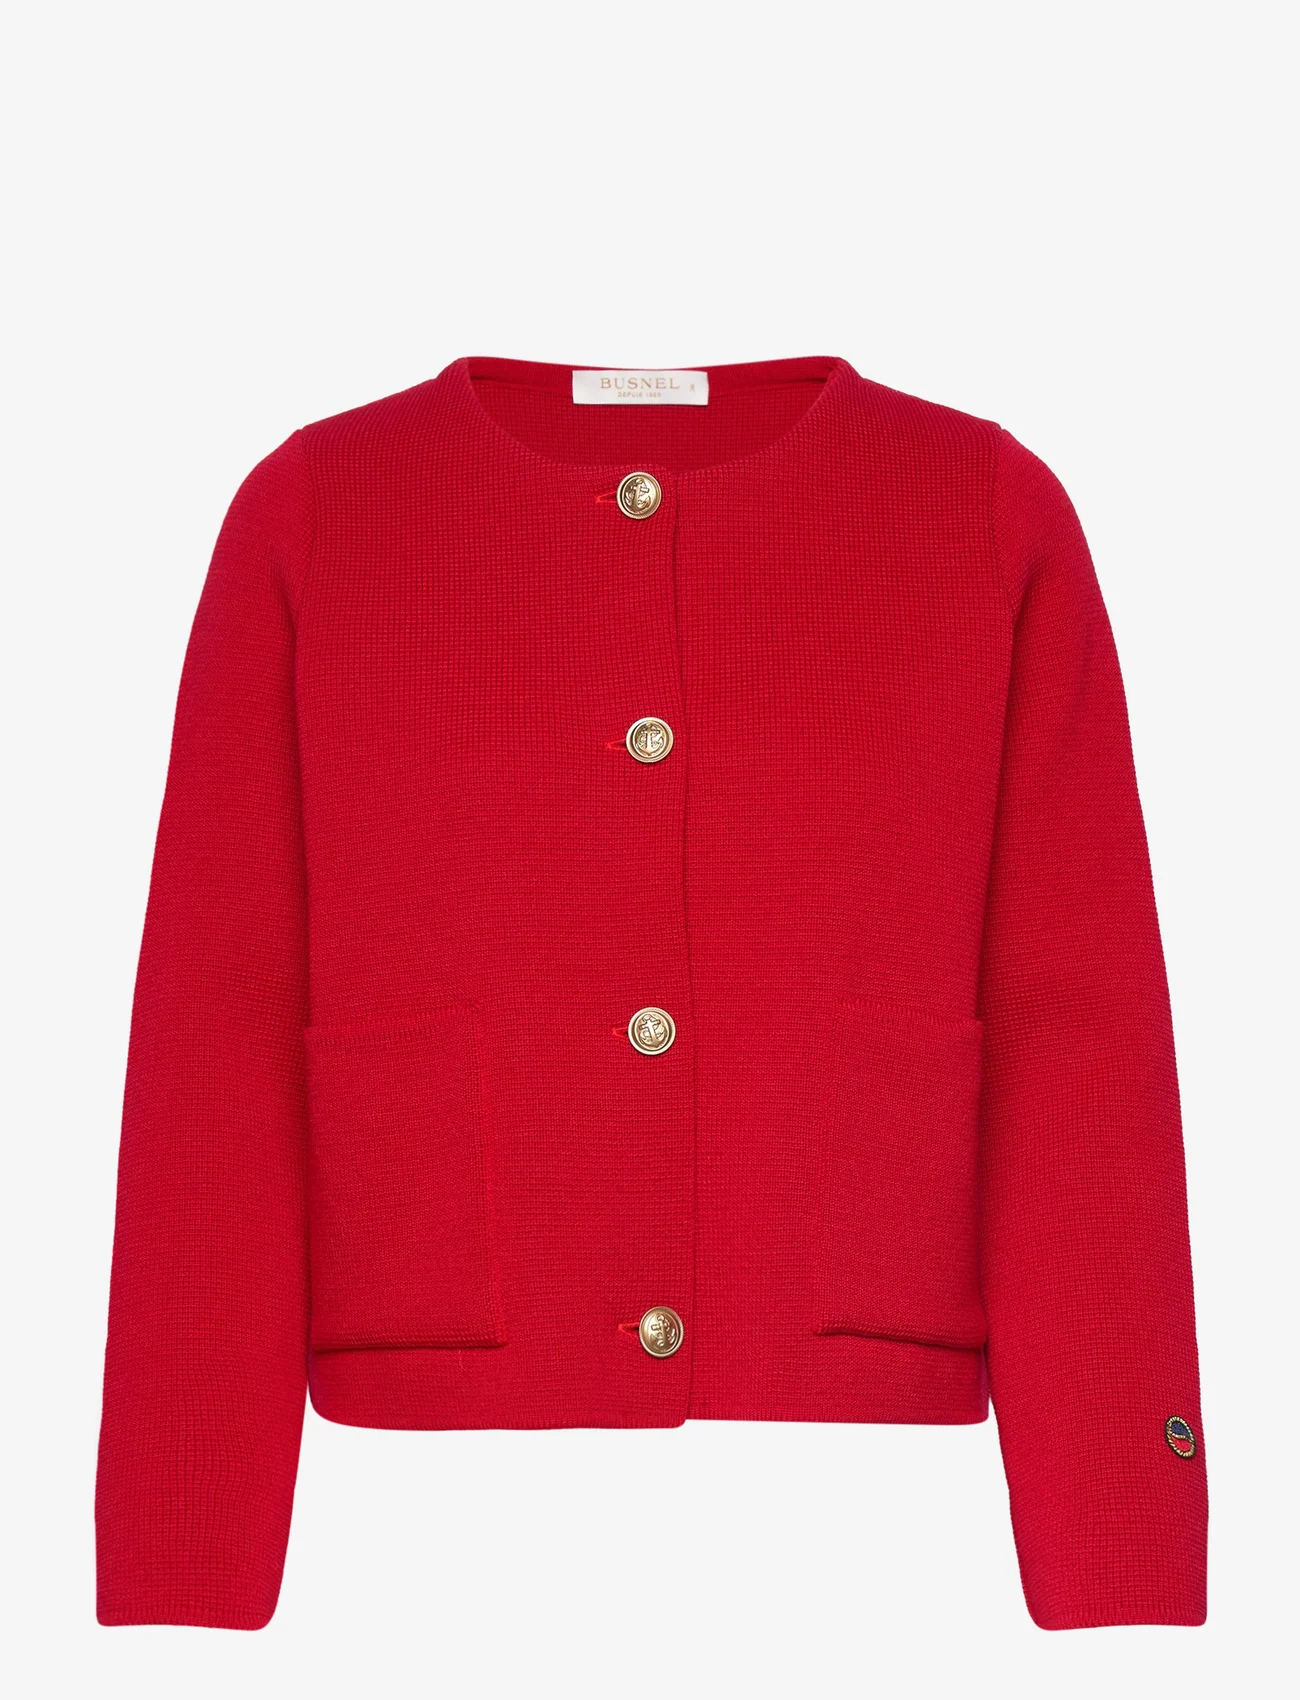 BUSNEL - MACEY  jacket - cardigans - red - 0